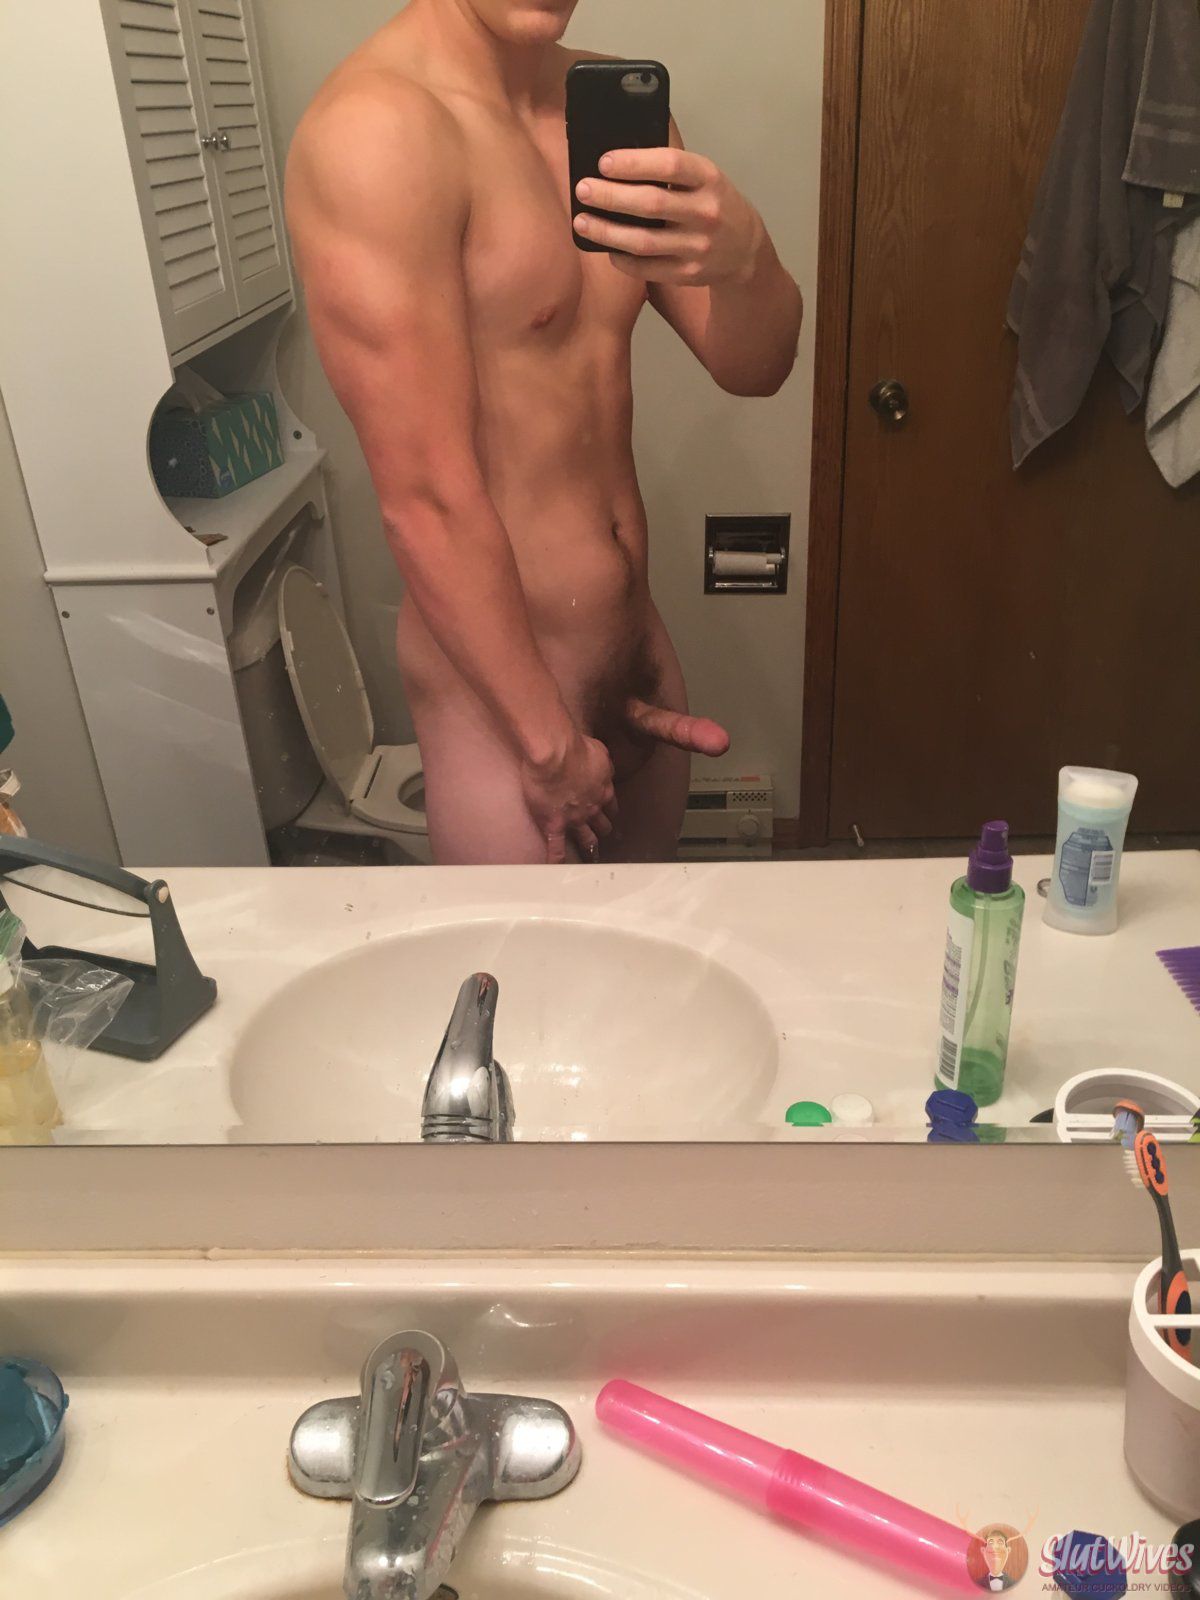 Looking for someones wife to fuck